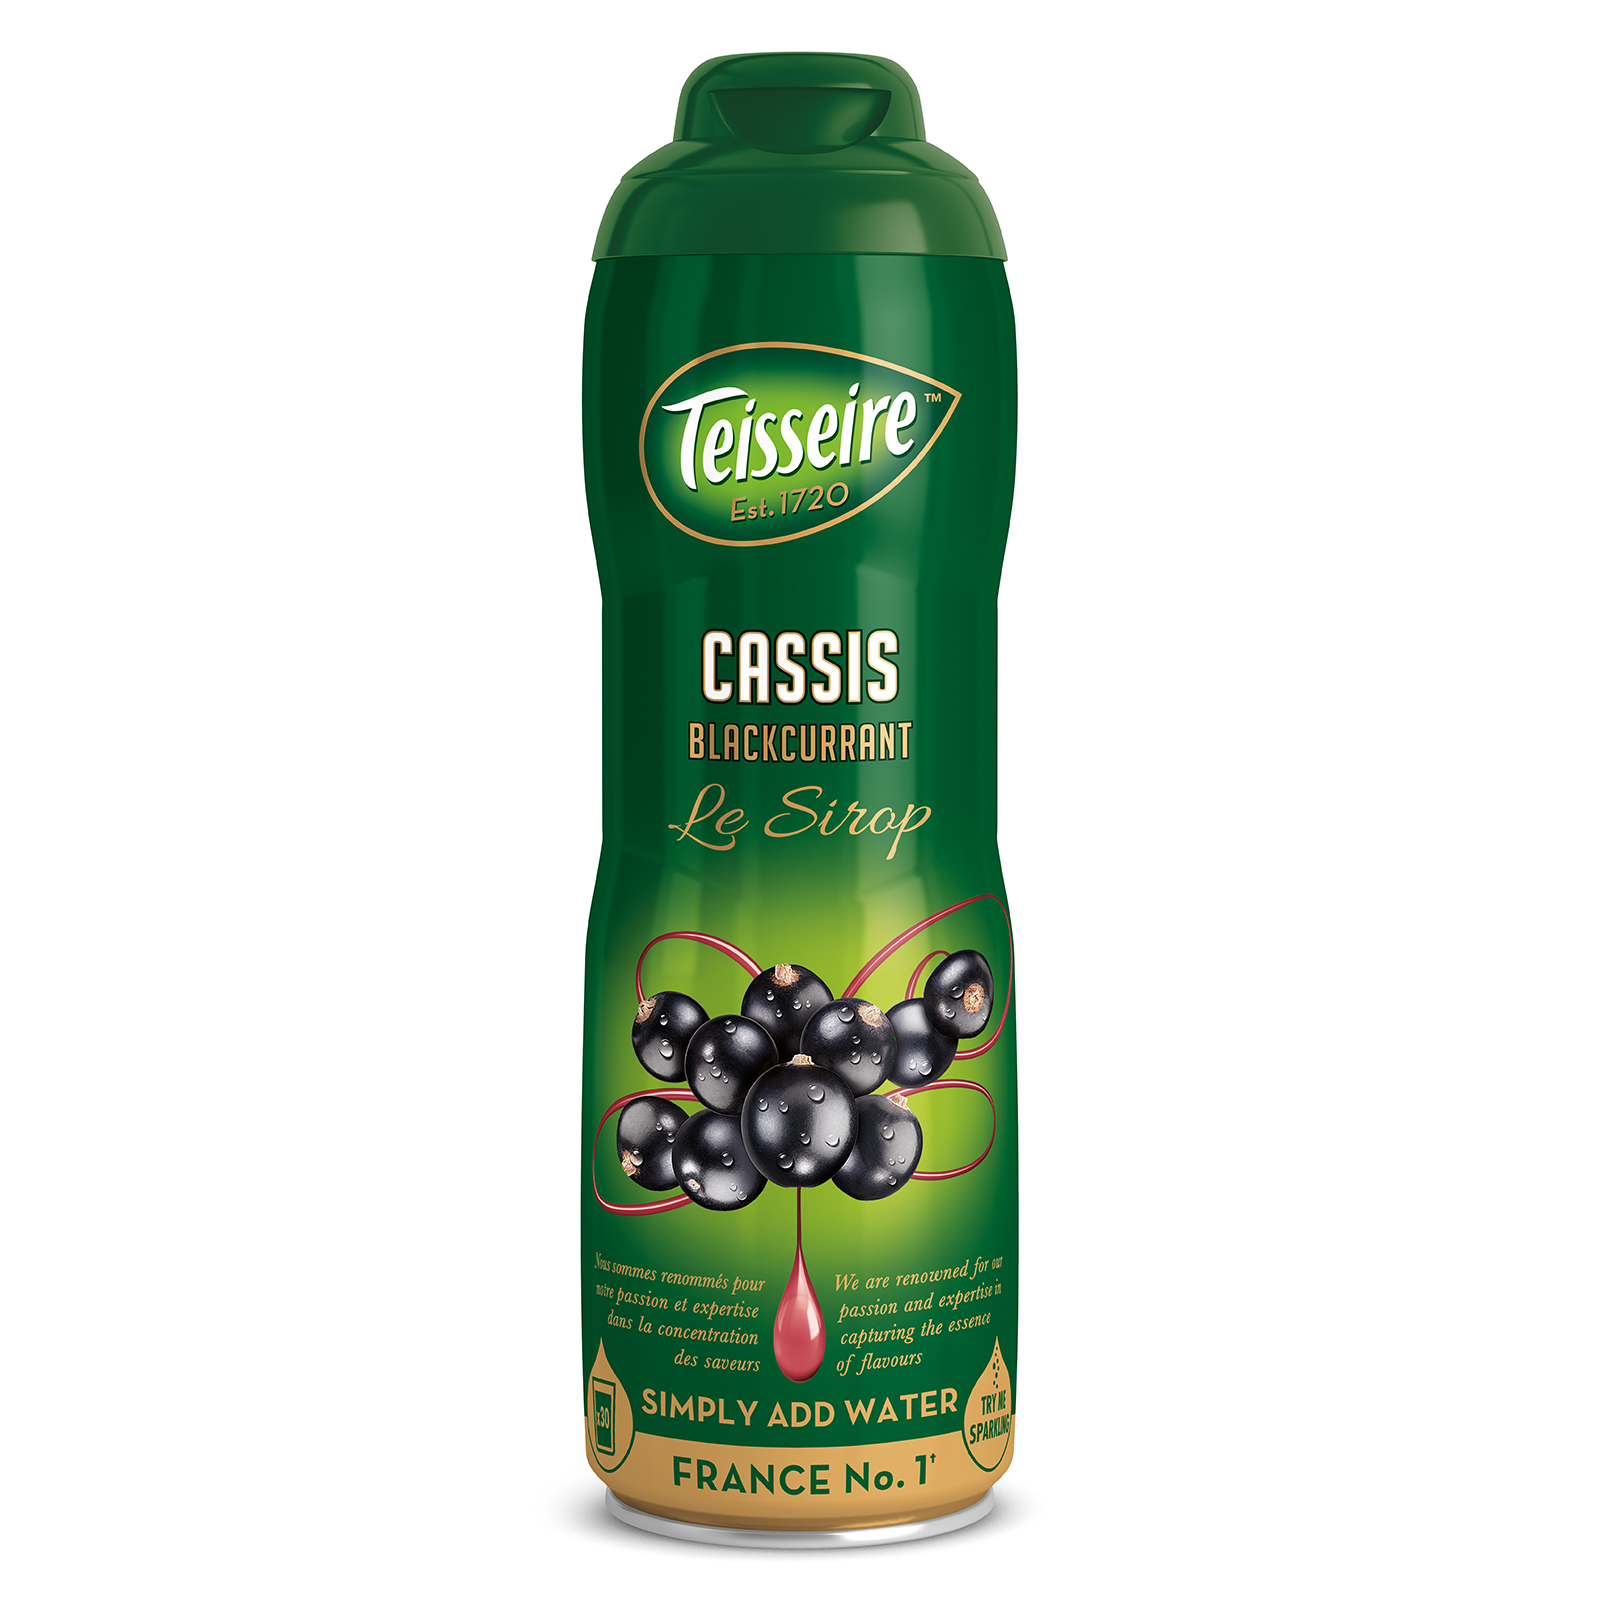 Teisseire Cassis Blackcurrant Syrup 600ml